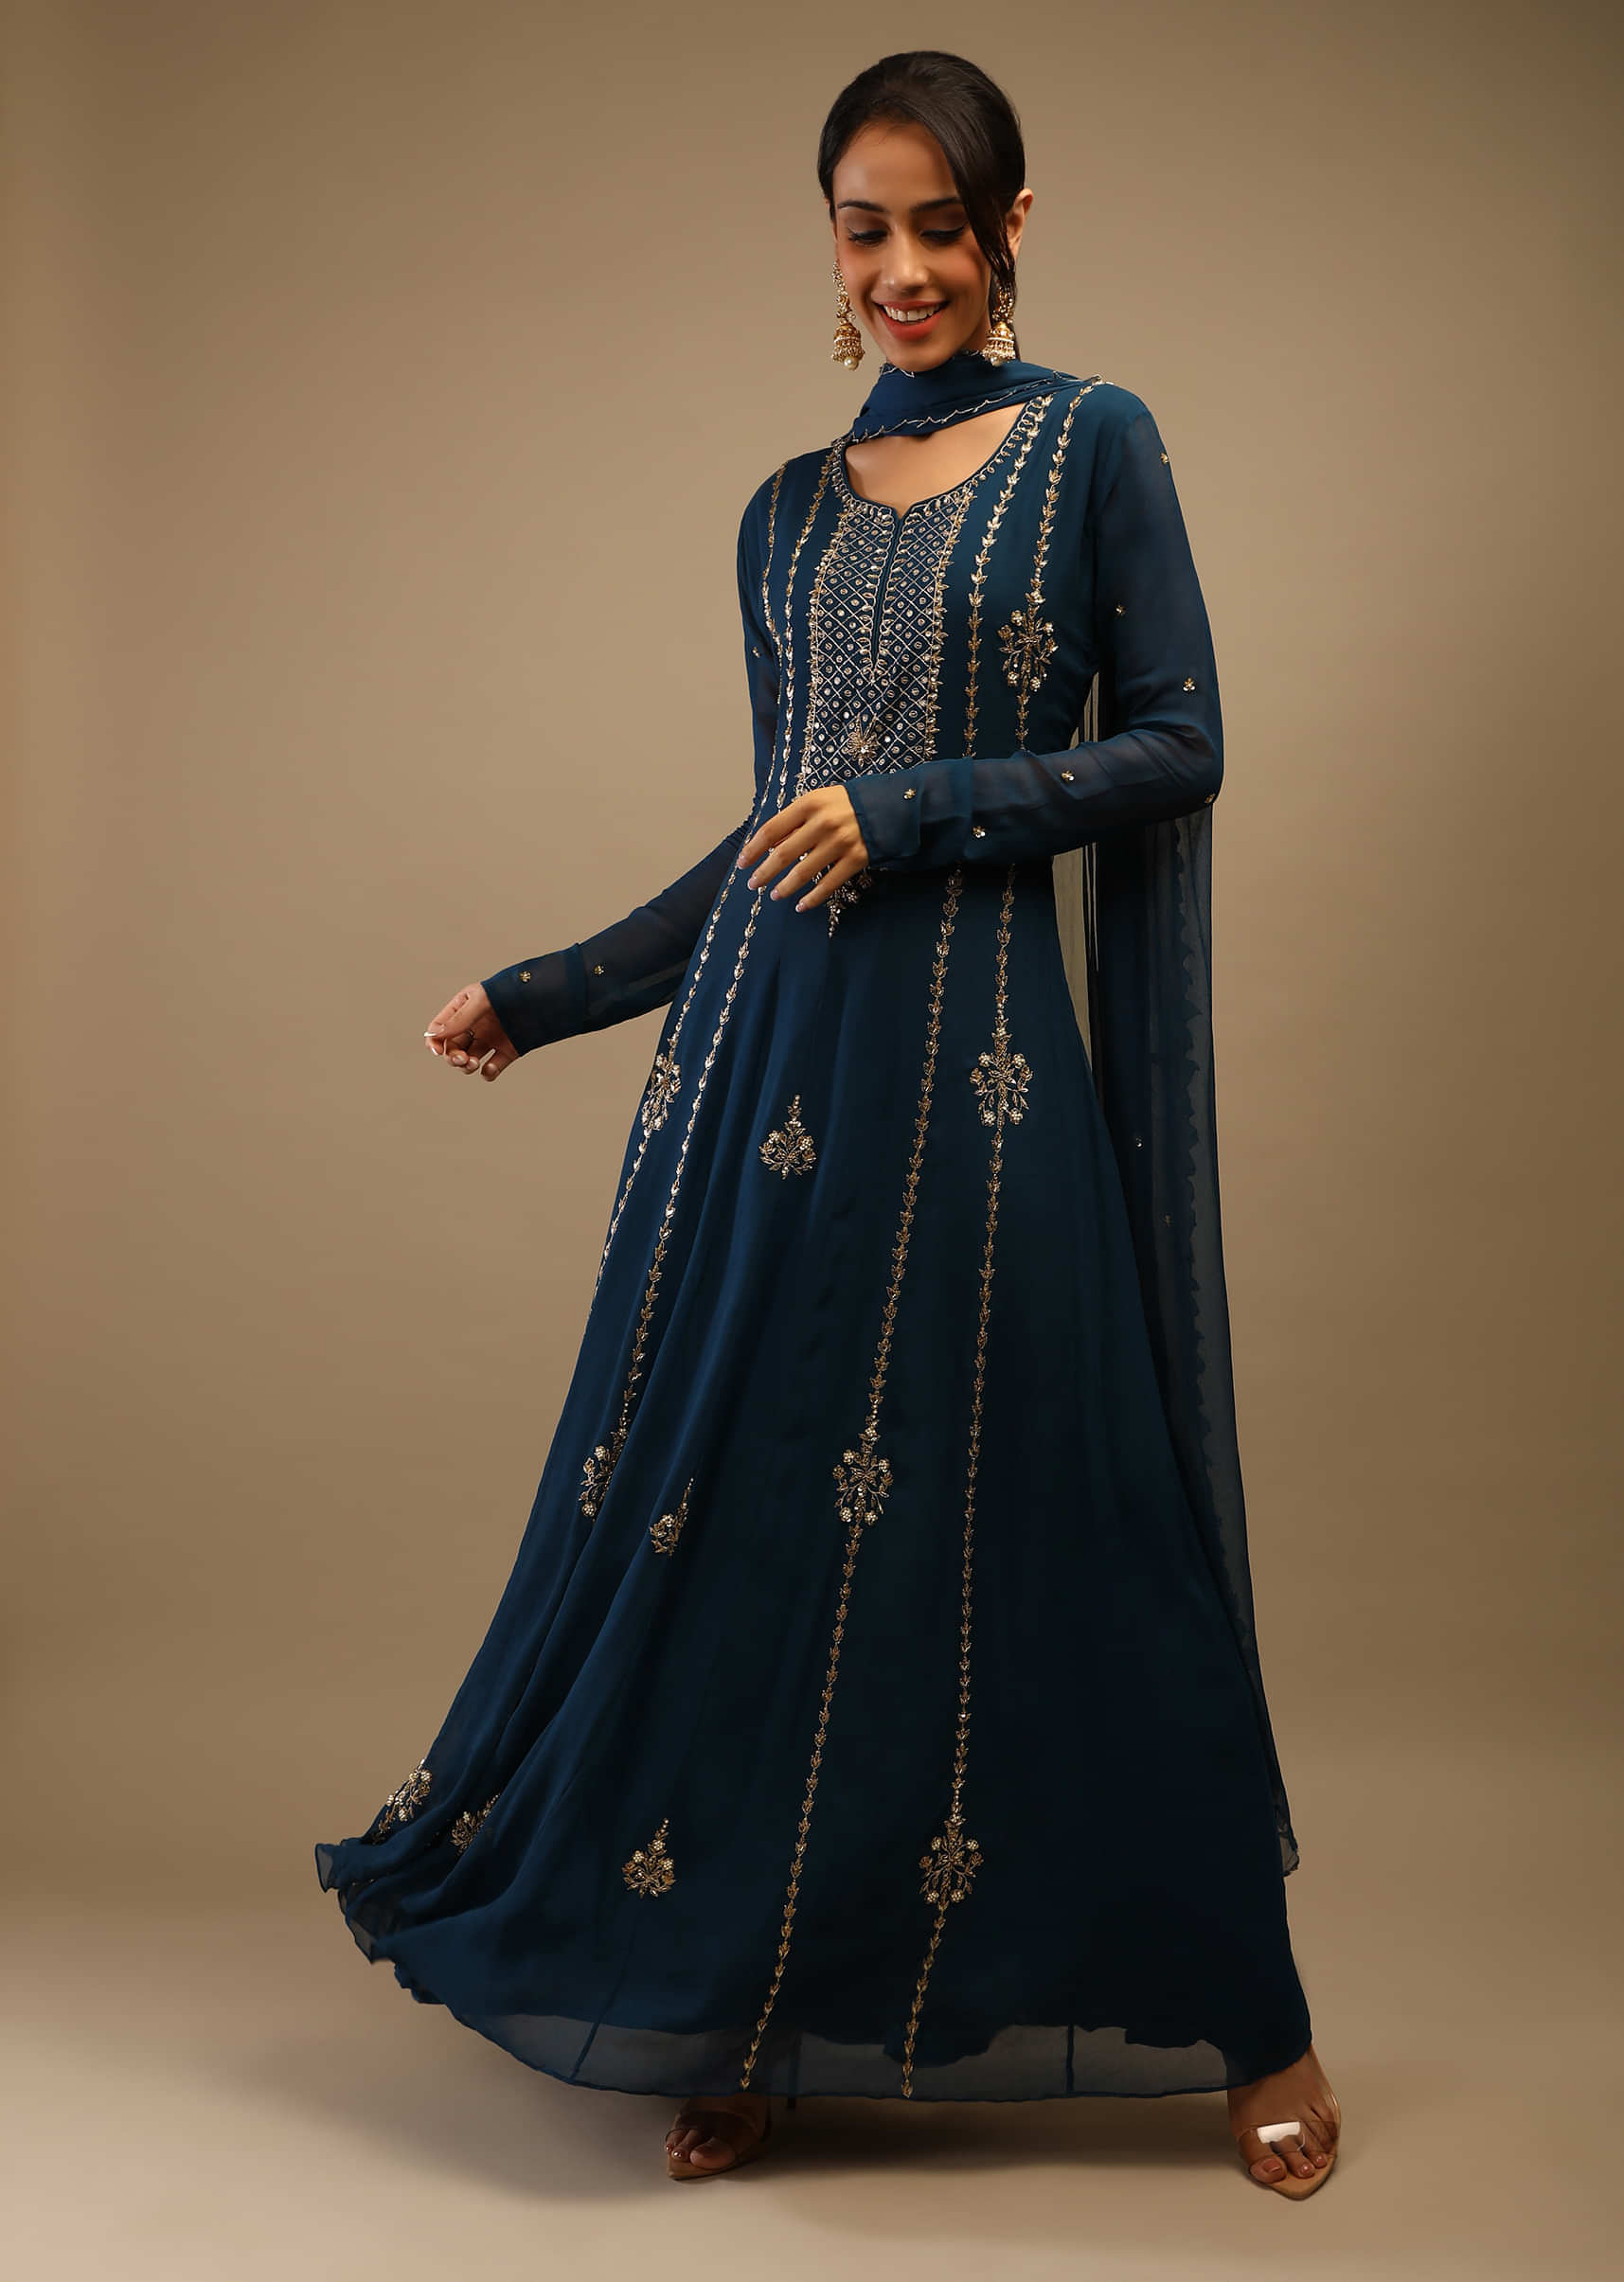 Sapphire Blue Anarkali Suit In Georgette With Zari And Cut Dana Embroidered Floral And Ethnic Motifs  